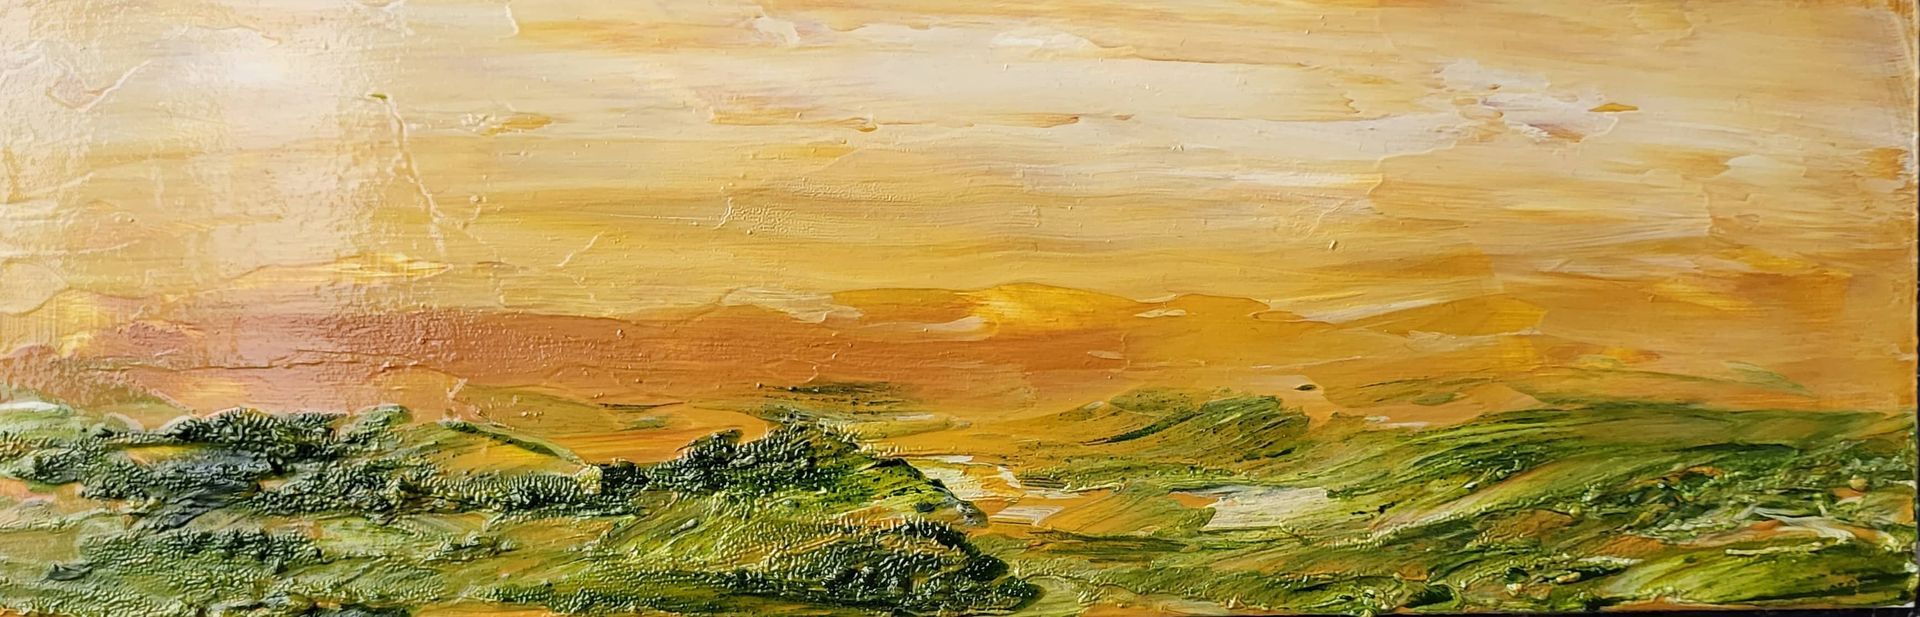 #O-84 Oil on Masonite 9 in. x 3 in. Framed. The foreground is lush with greenery; contrast, the sky and background are bathed in yellows and earth tones.